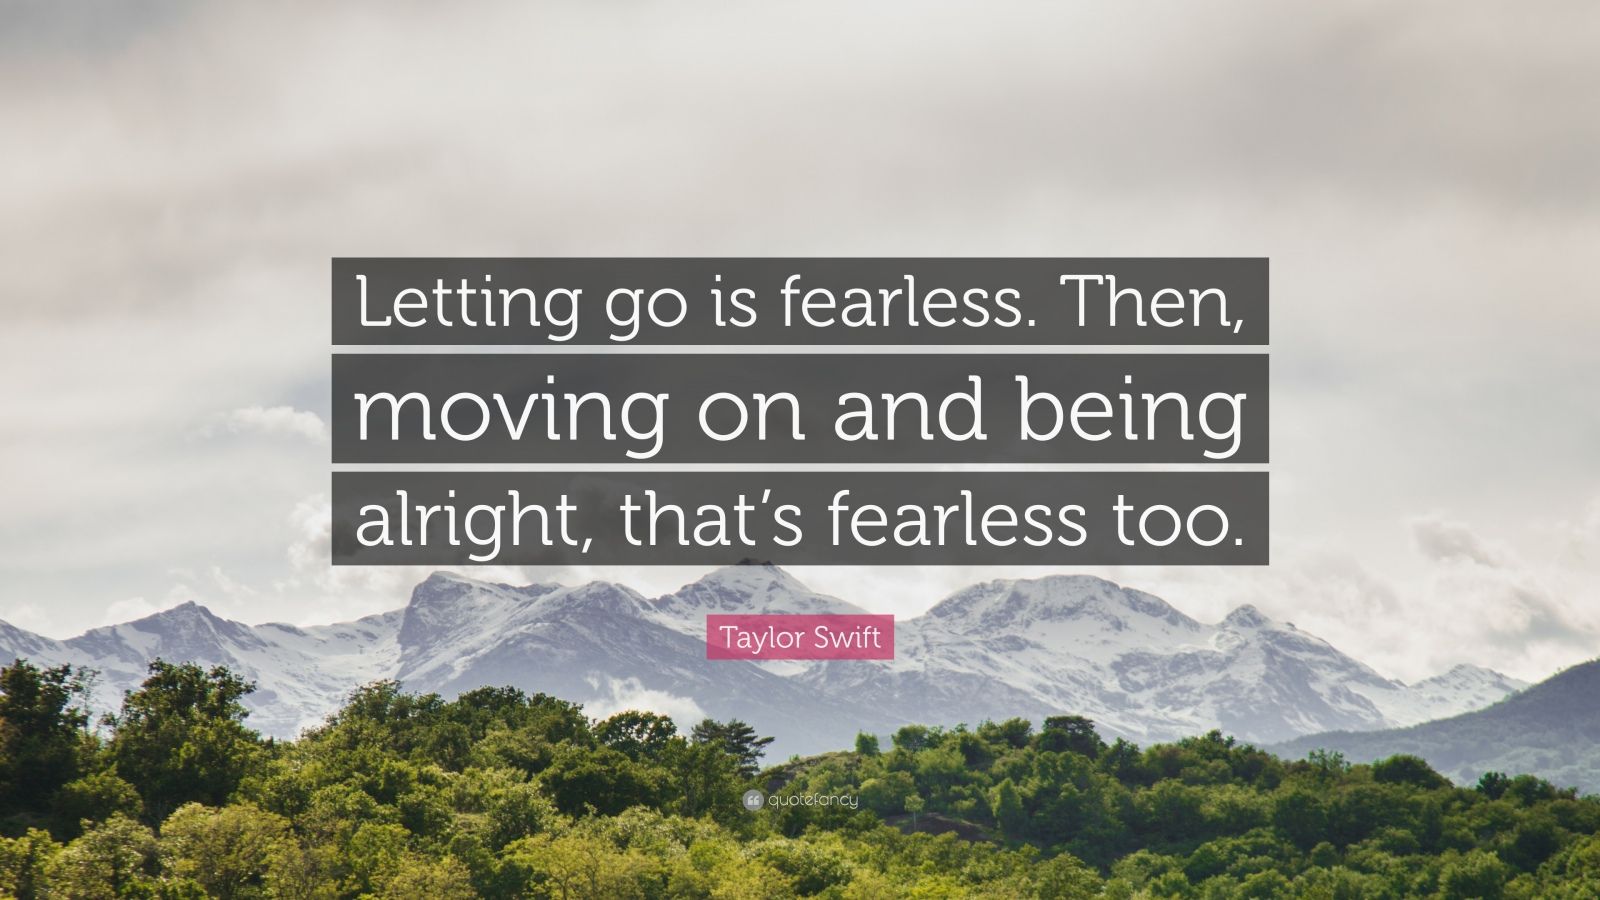 Taylor Swift Quote: “Letting go is fearless. Then, moving on and being ...